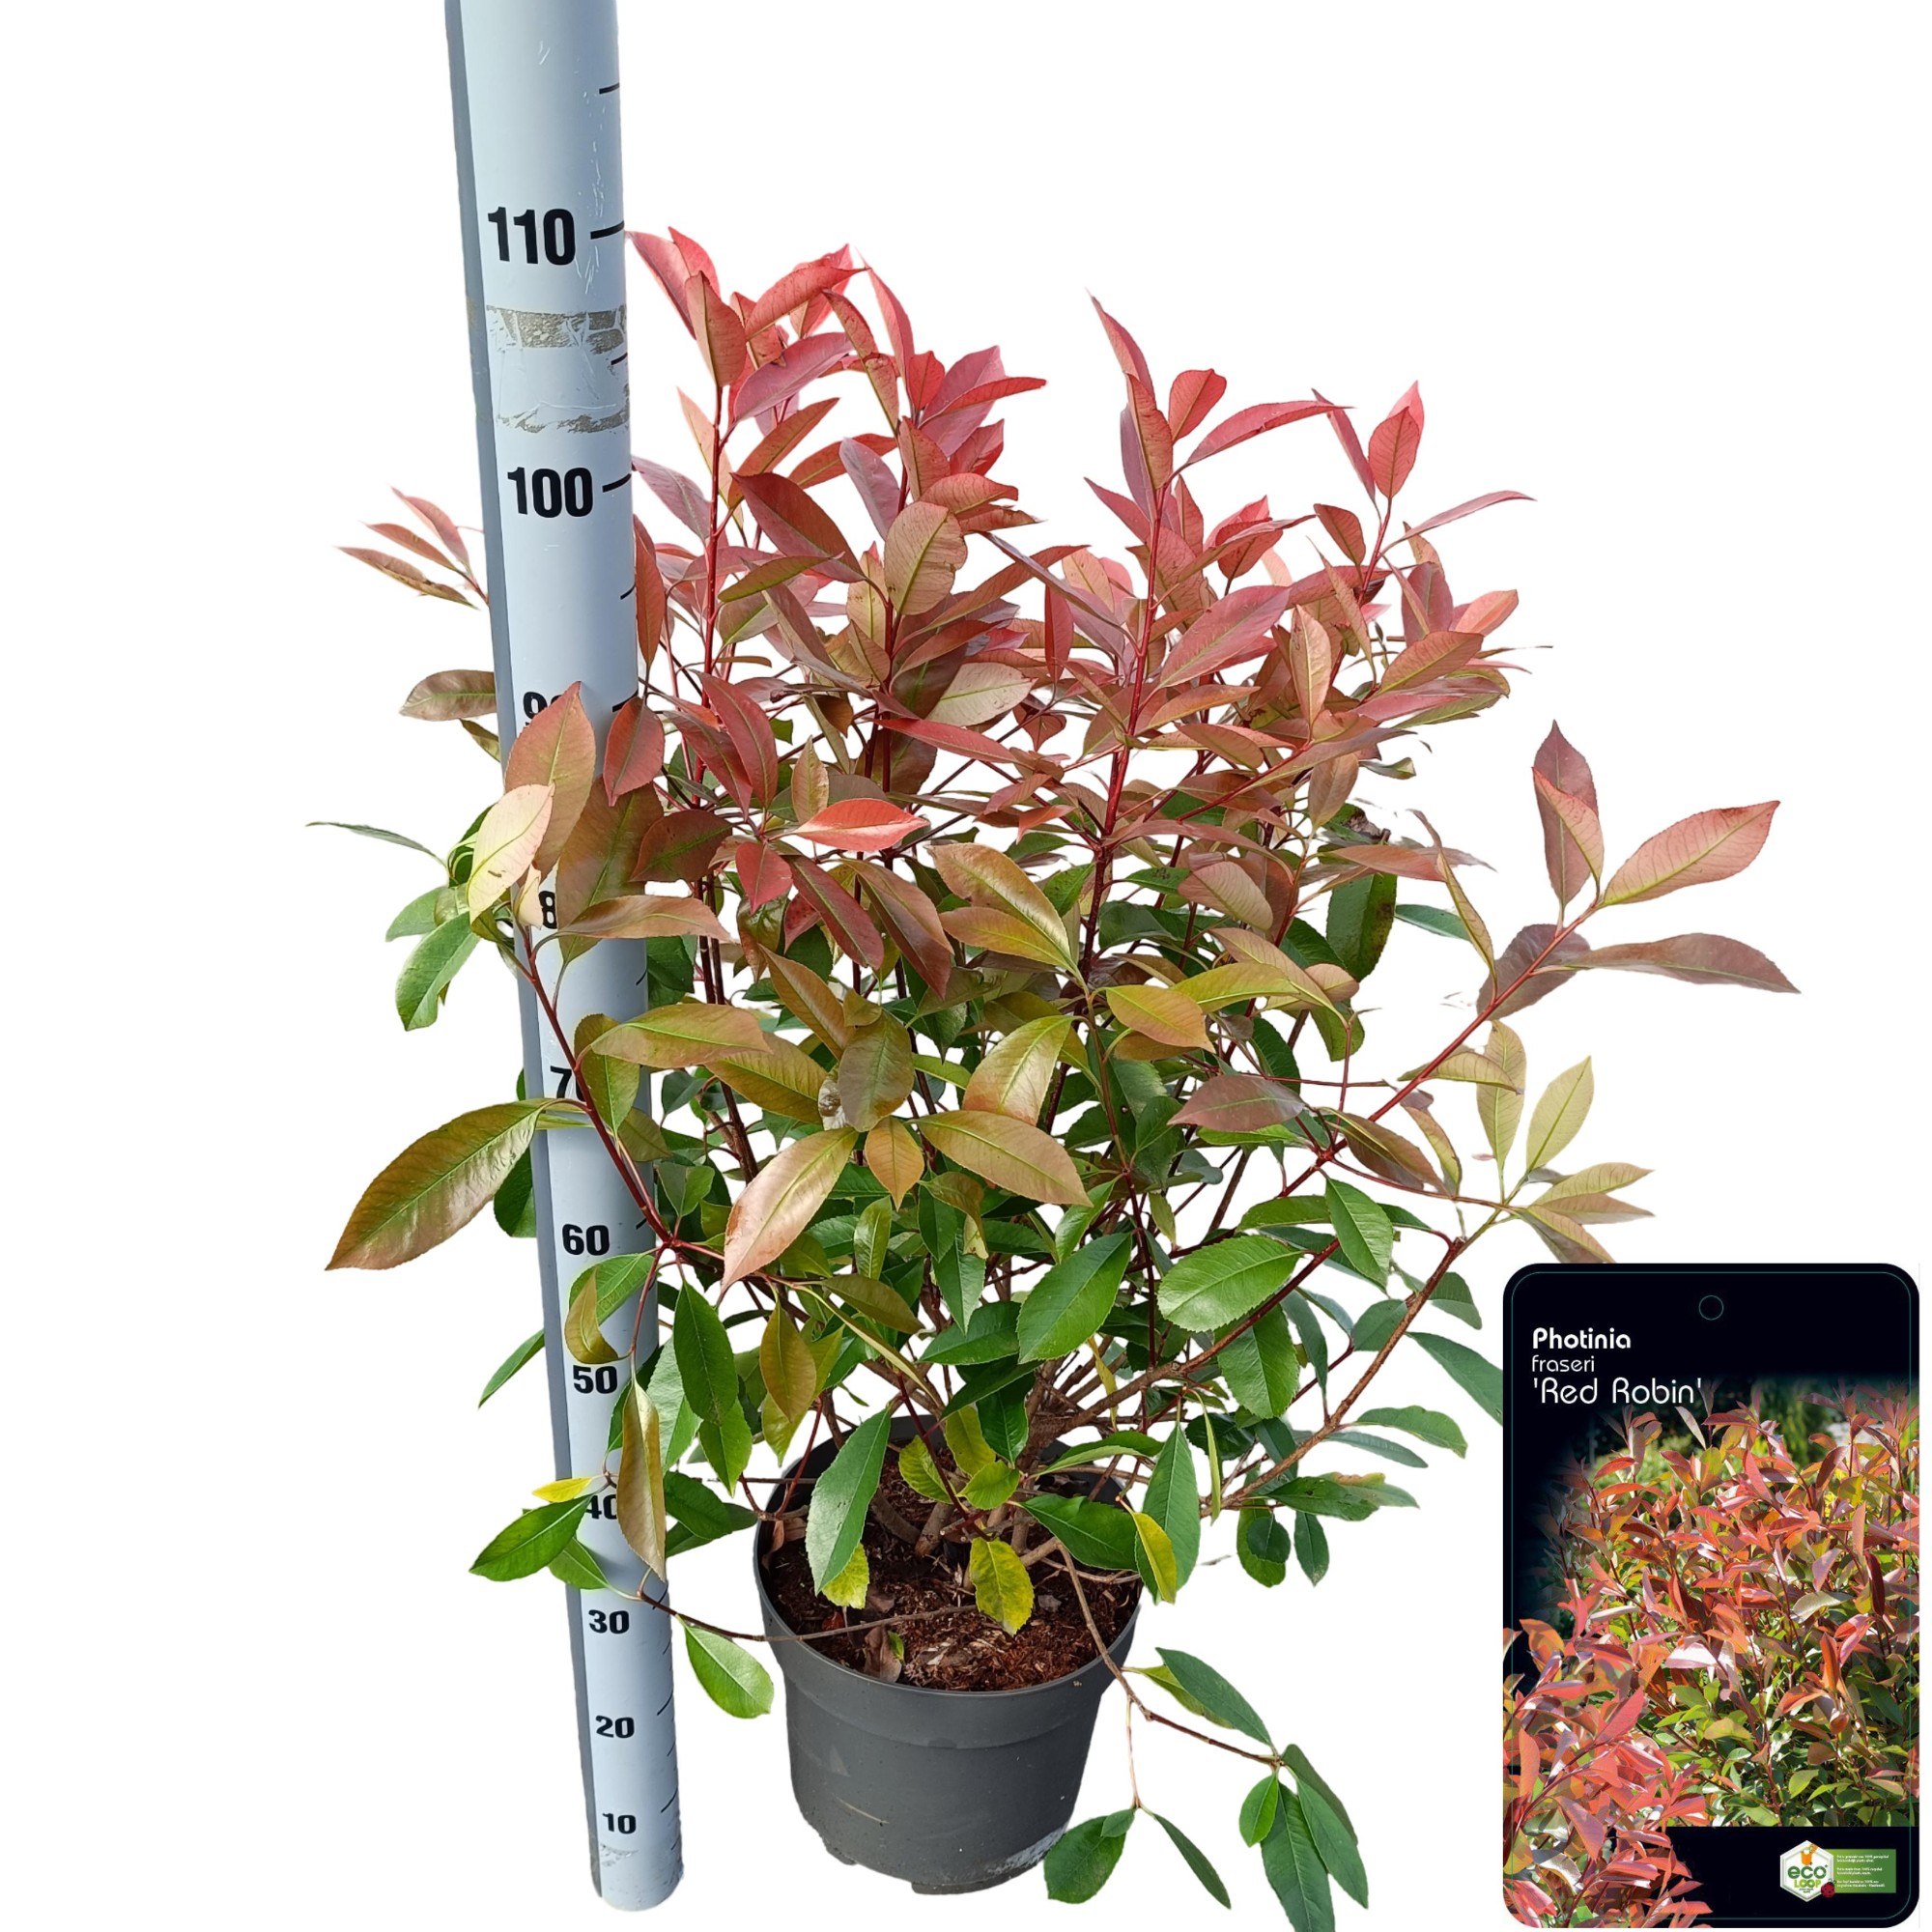 Picture of Photinia fraseri 'Red Robin' C10